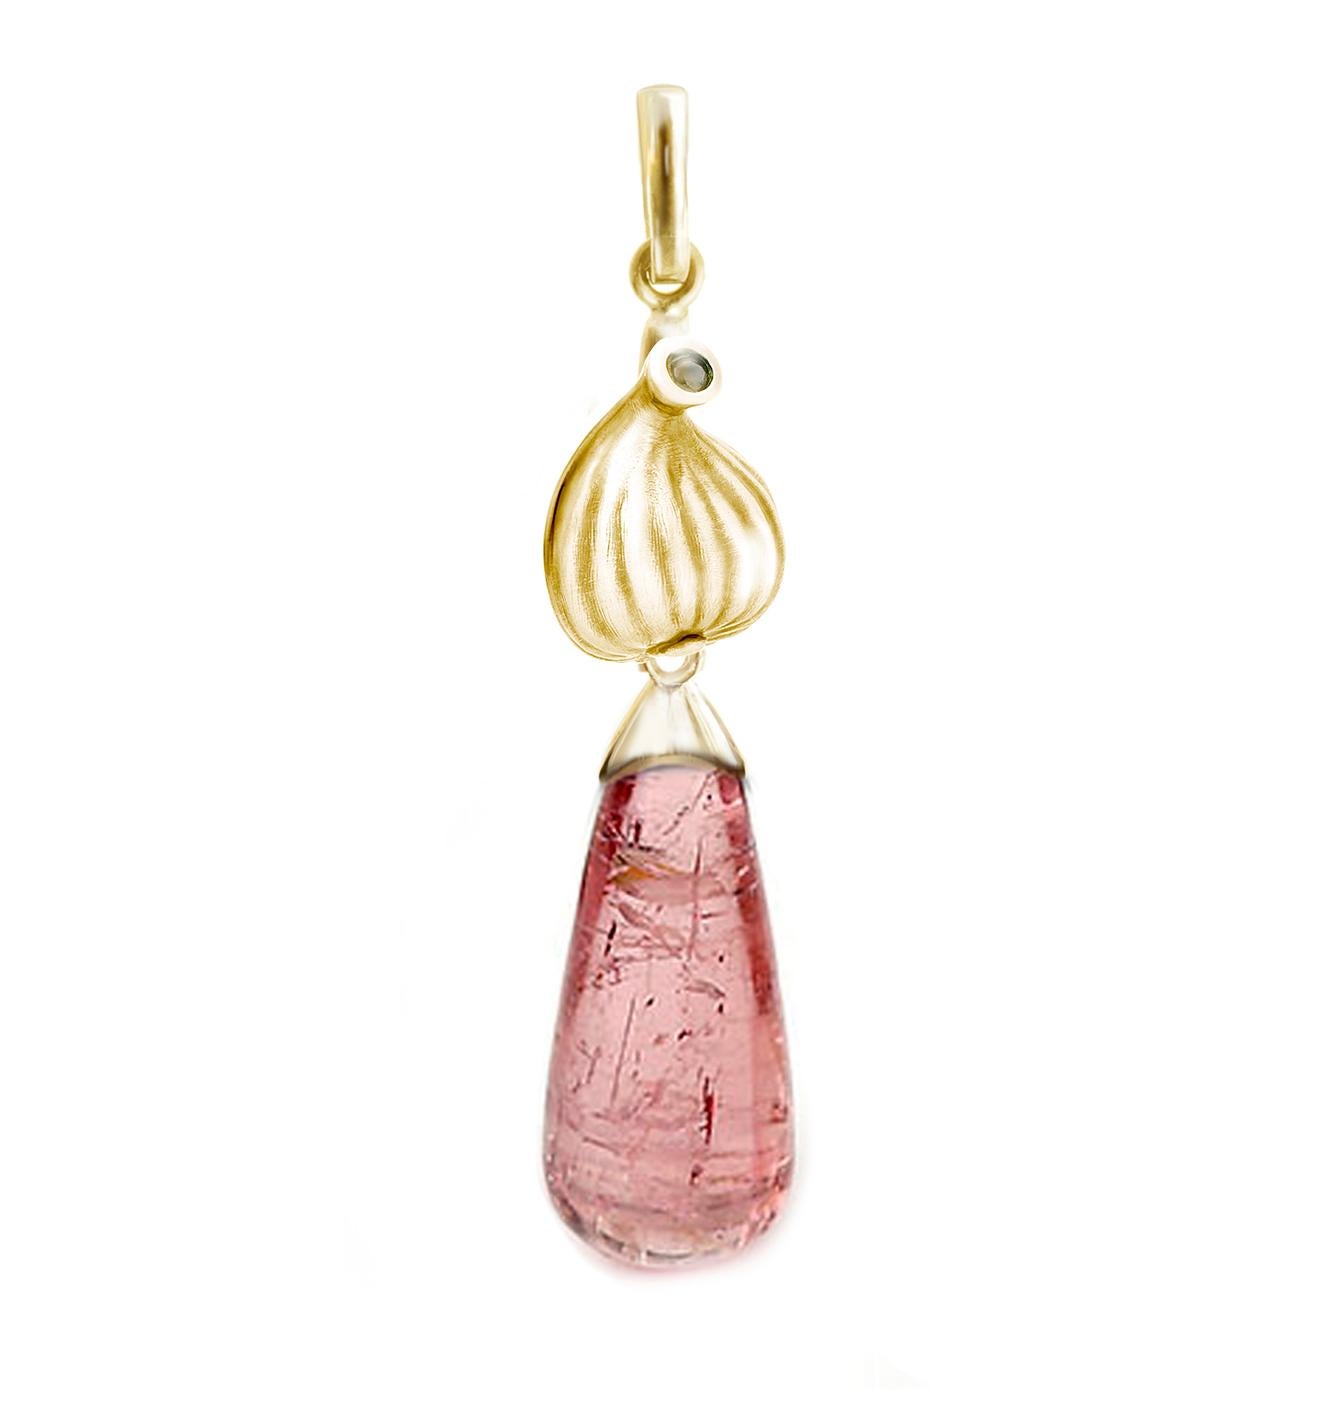 This contemporary drop Pendant Necklace by the artist is made of 18 karat yellow gold with a 20x8 mm (8.23 carats) natural rose tourmaline and round diamonds. The Fig collection was featured in a review by Vogue UA and was designed by the artist and